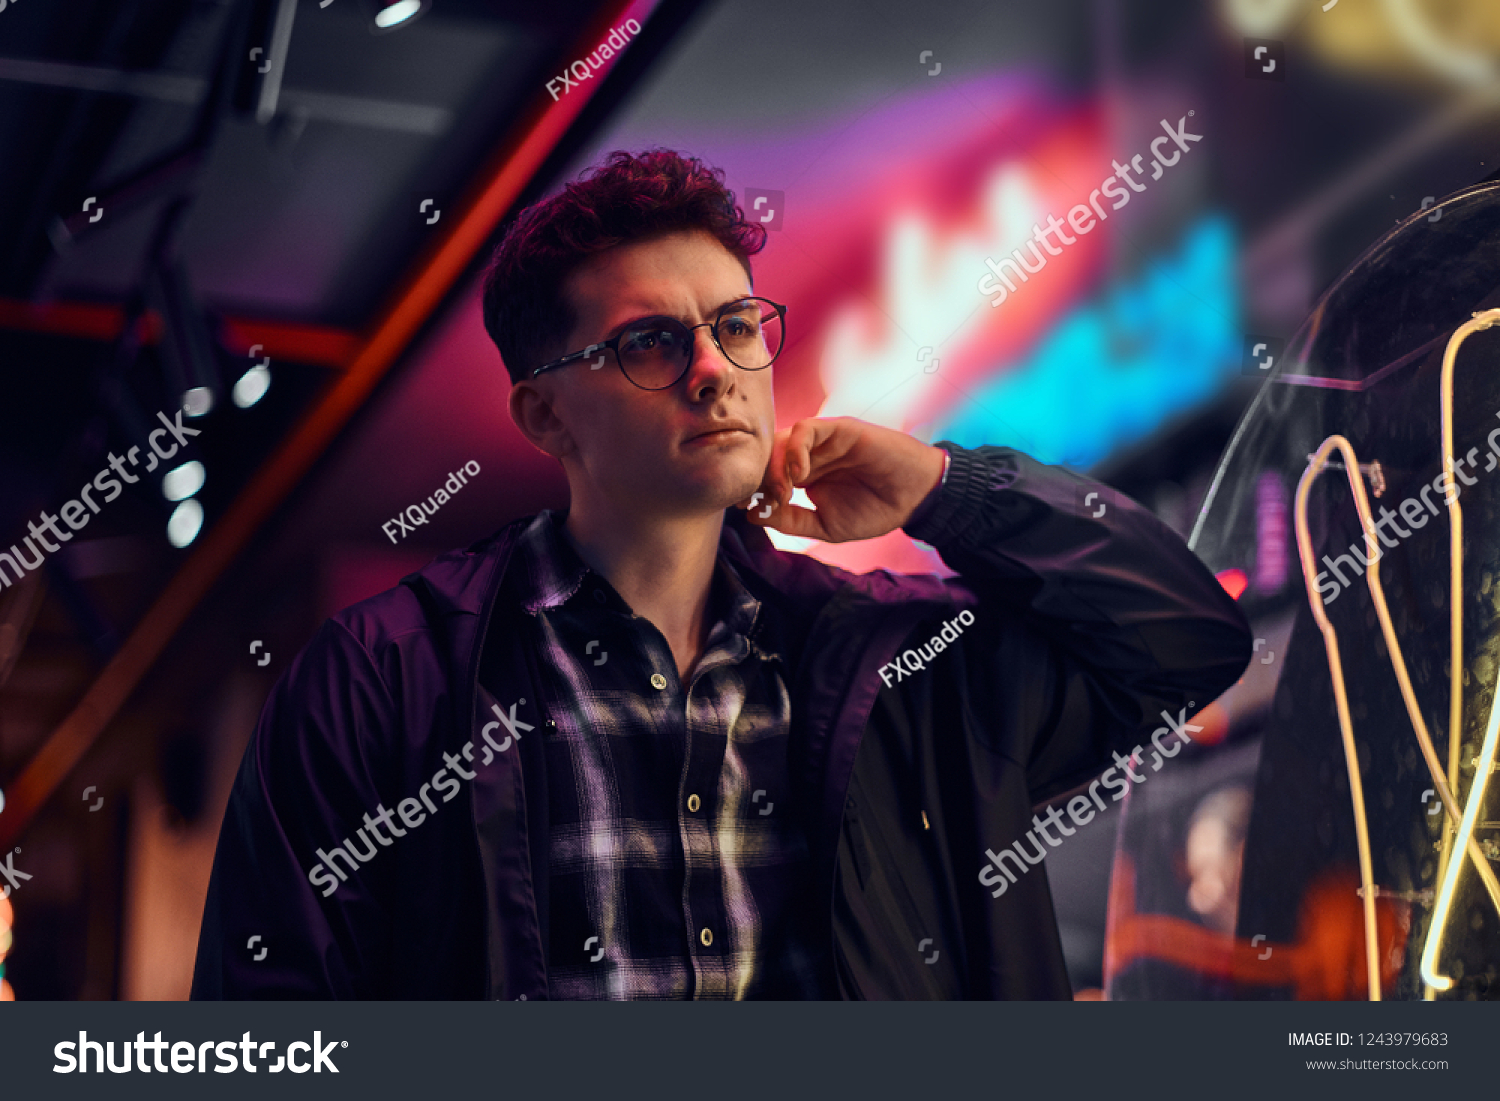 A handsome young man standing at night in the street. Illuminated signboards, neon, lights. #1243979683